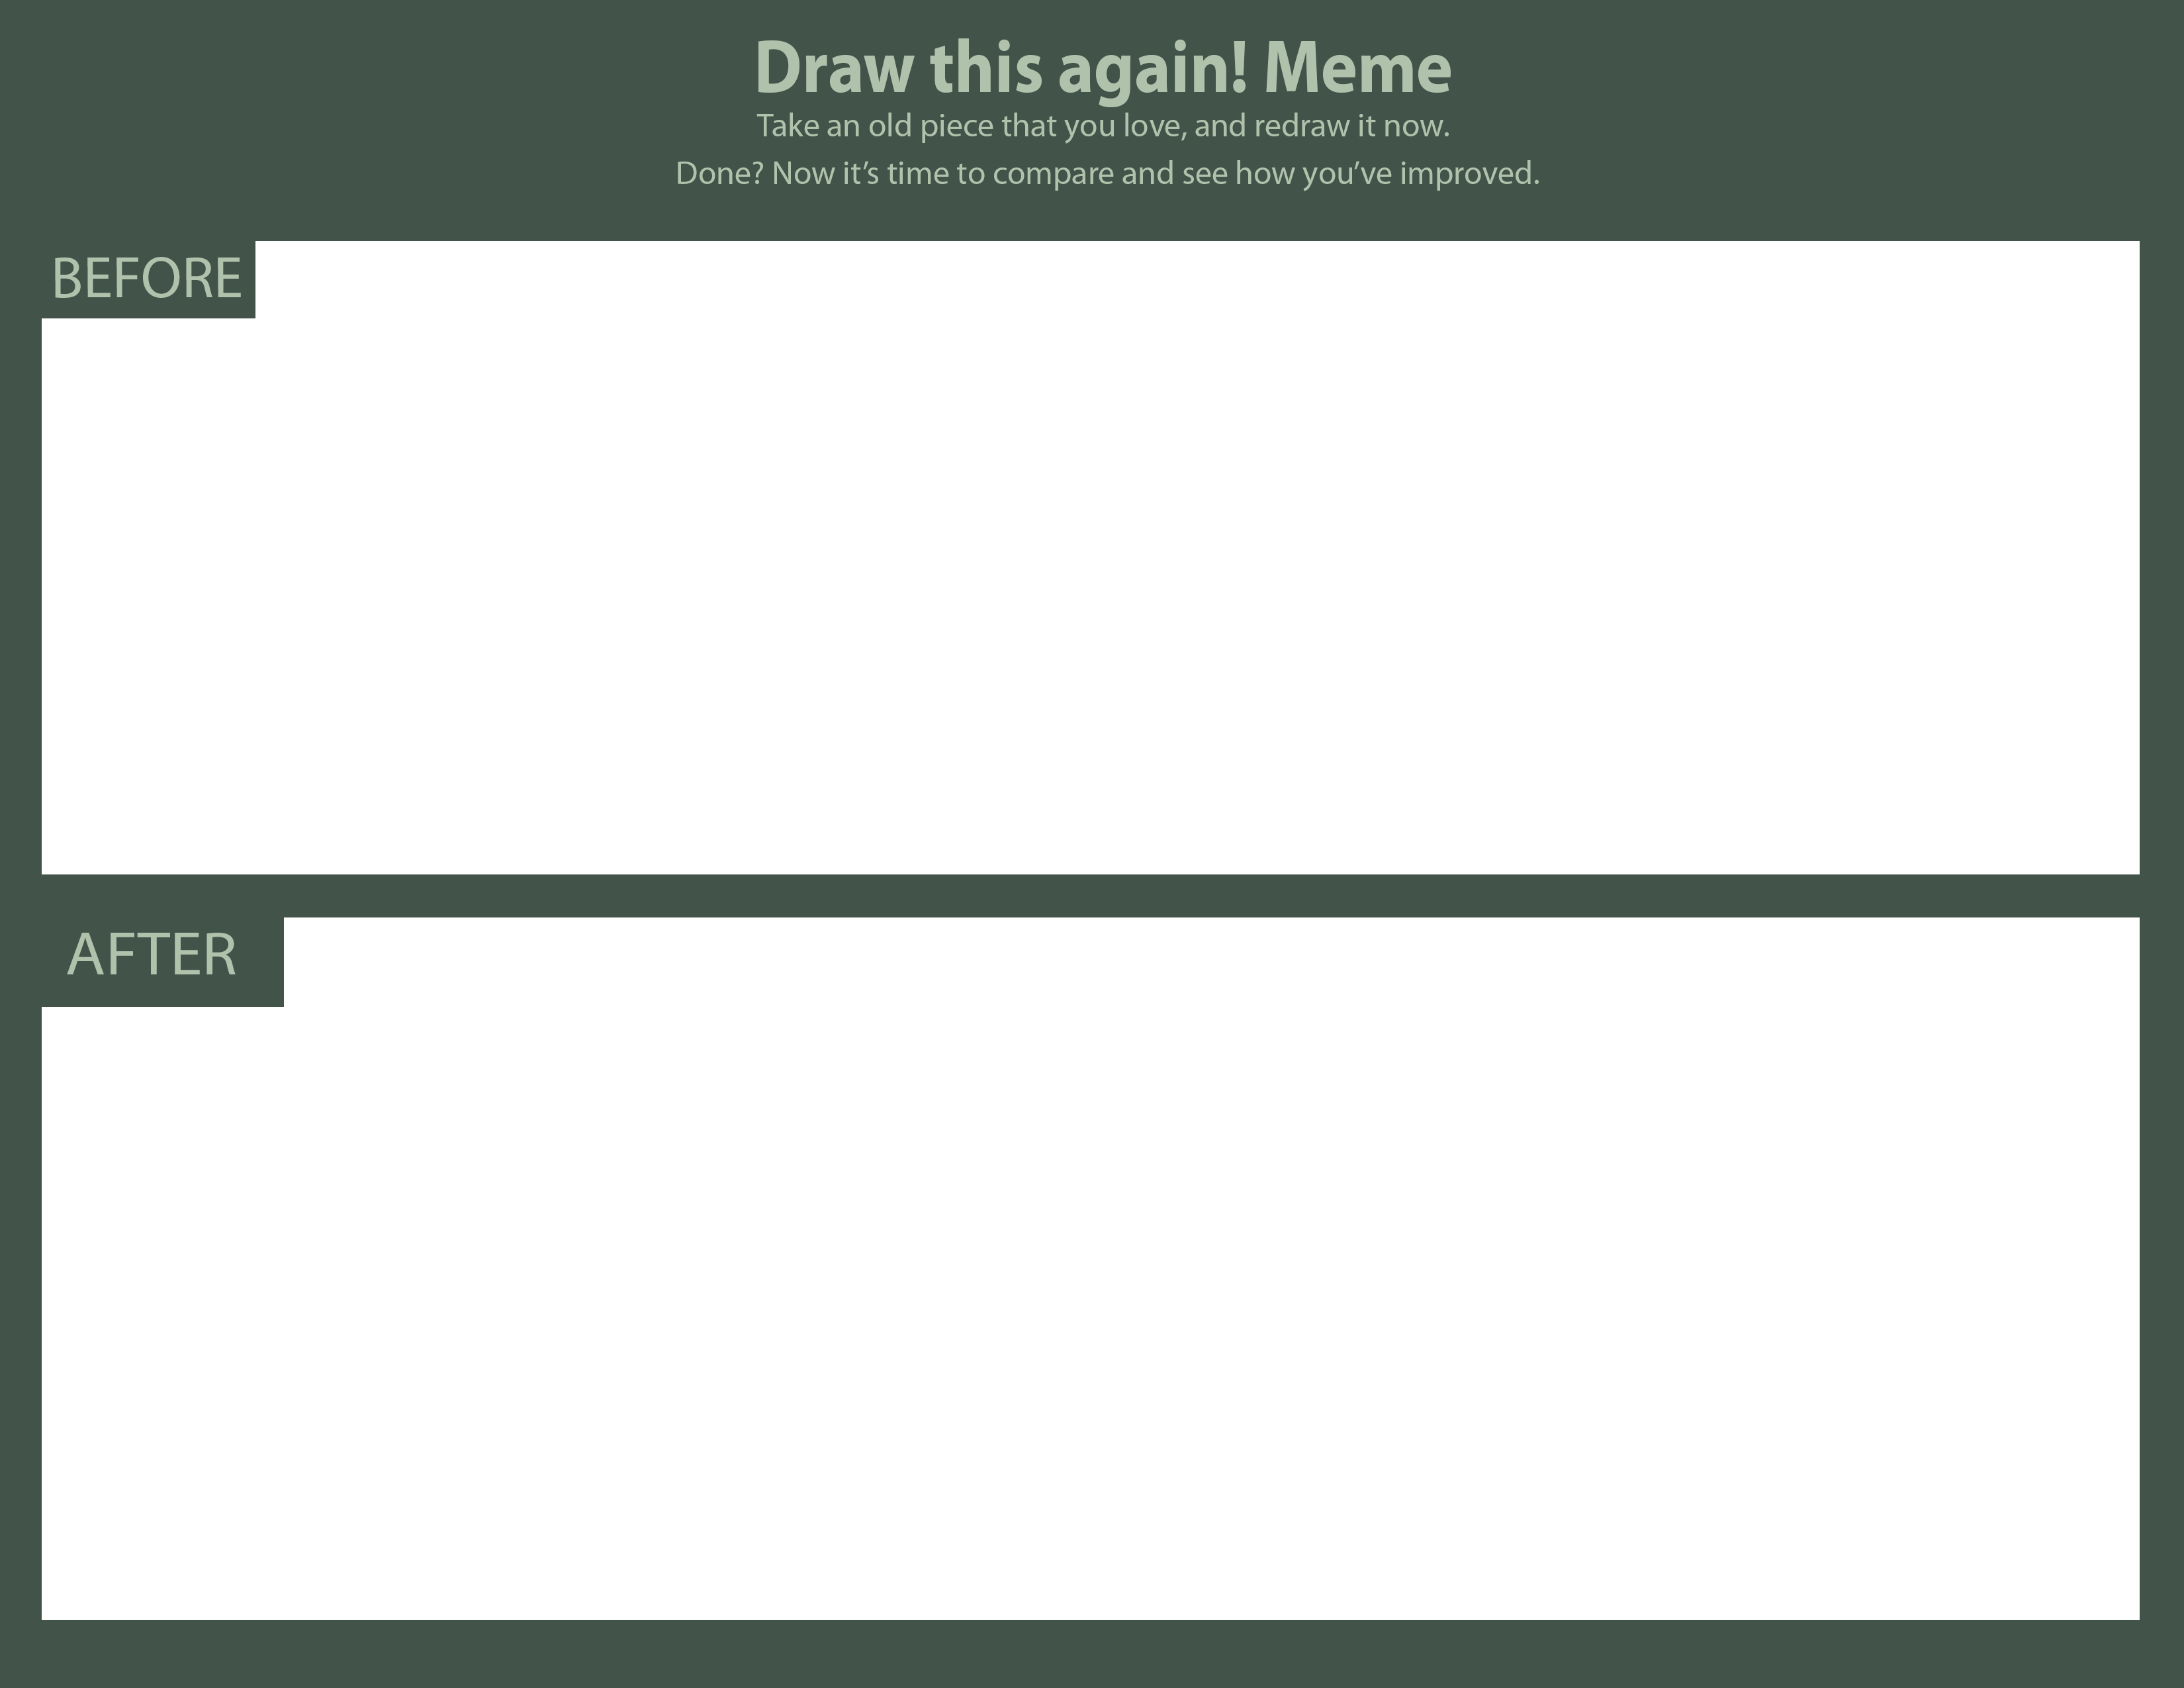 Draw this again meme blank template  landscape by ZAKKIDO on 